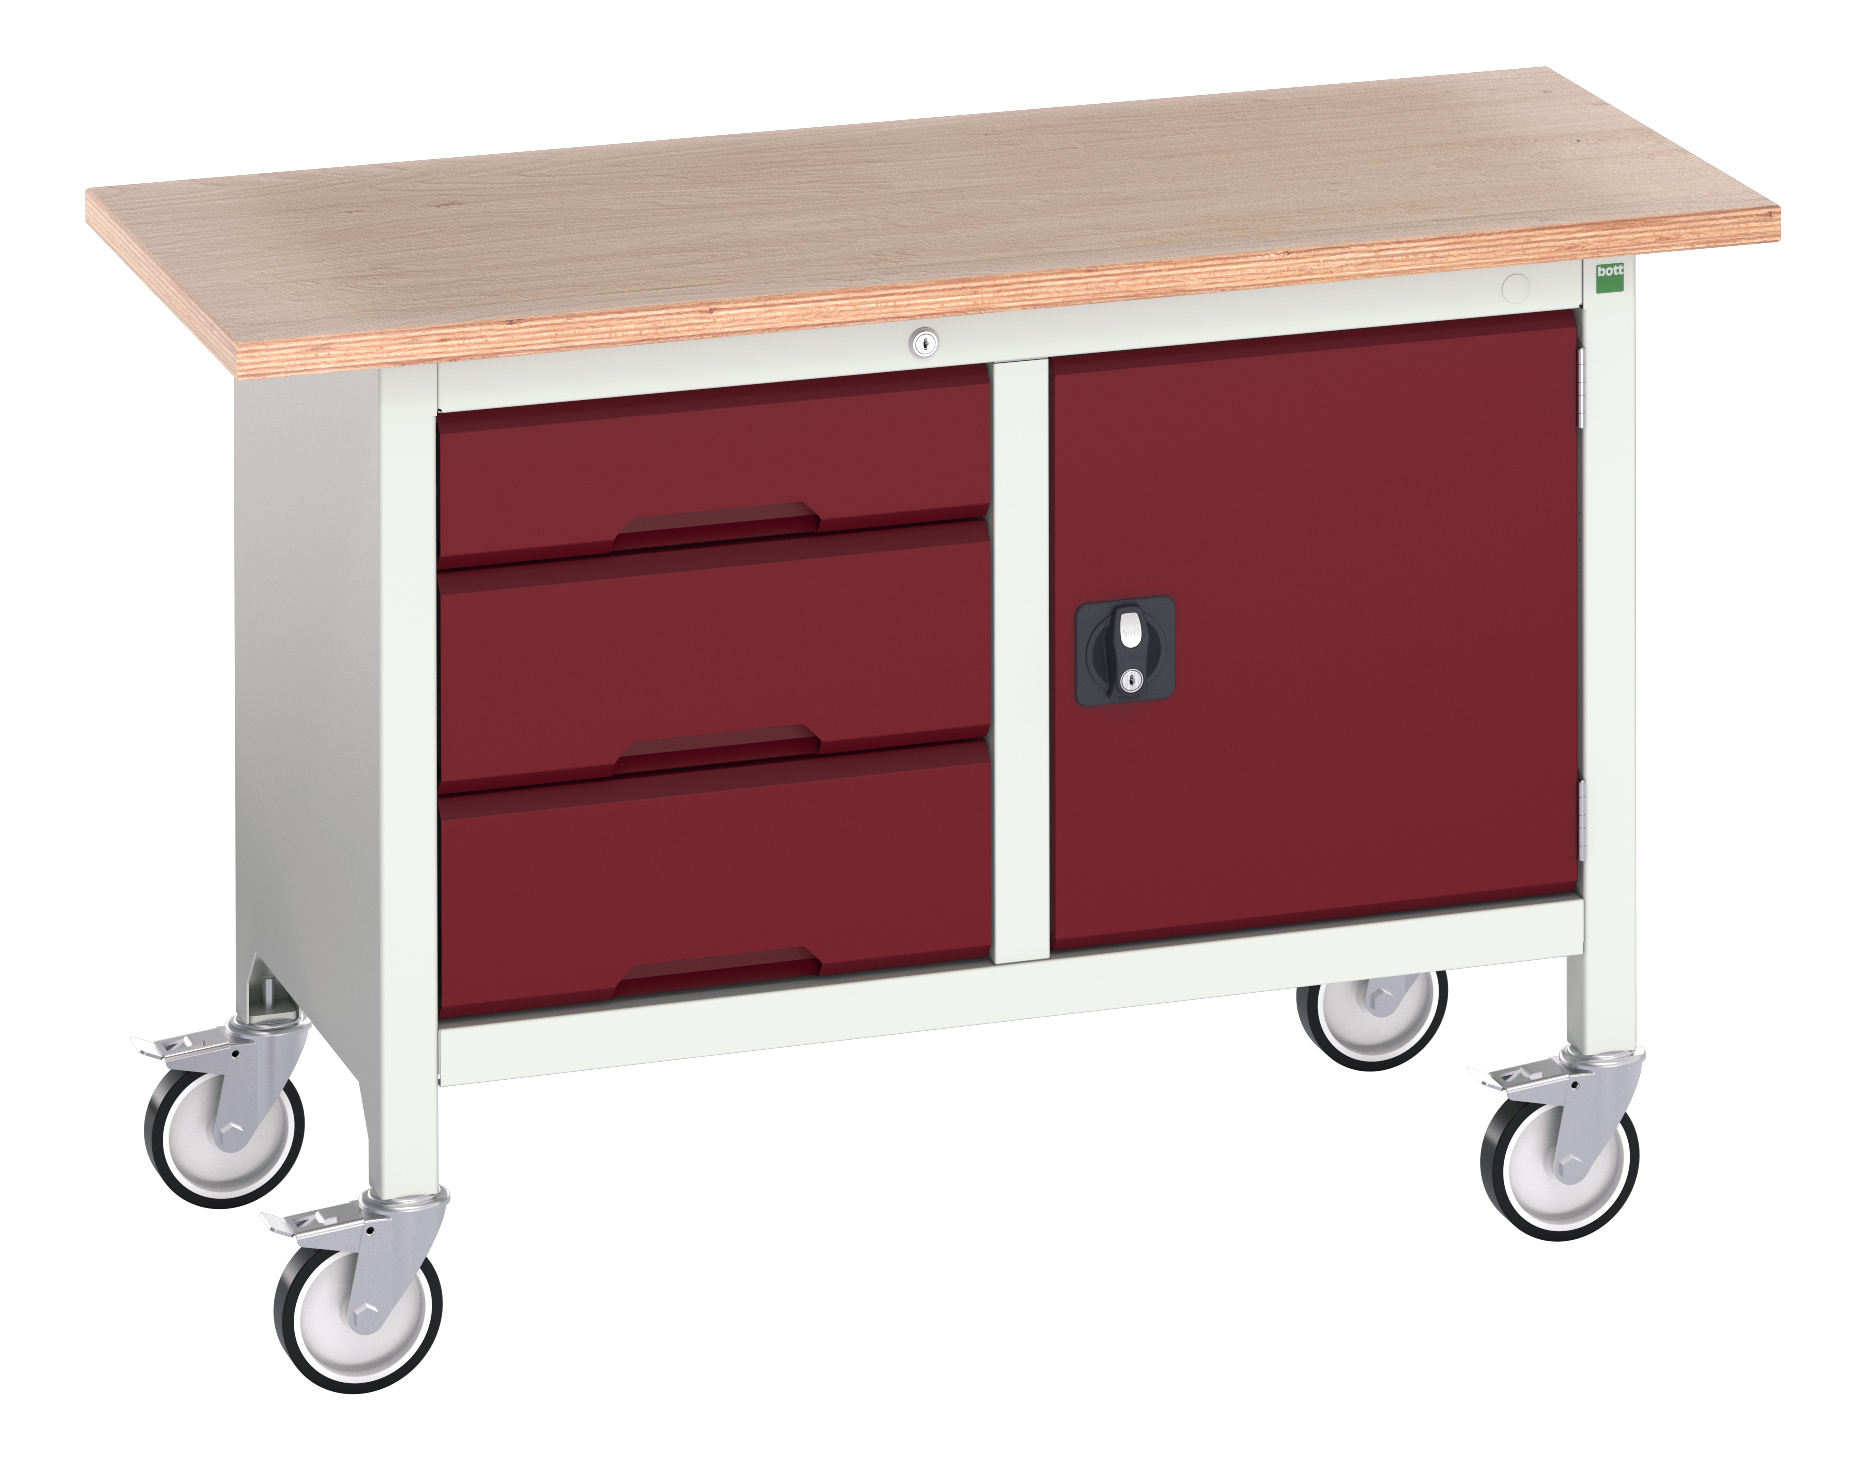 Bott Verso Mobile Storage Bench With 3 Drawer Cabinet / Full Cupboard - 16923203.24